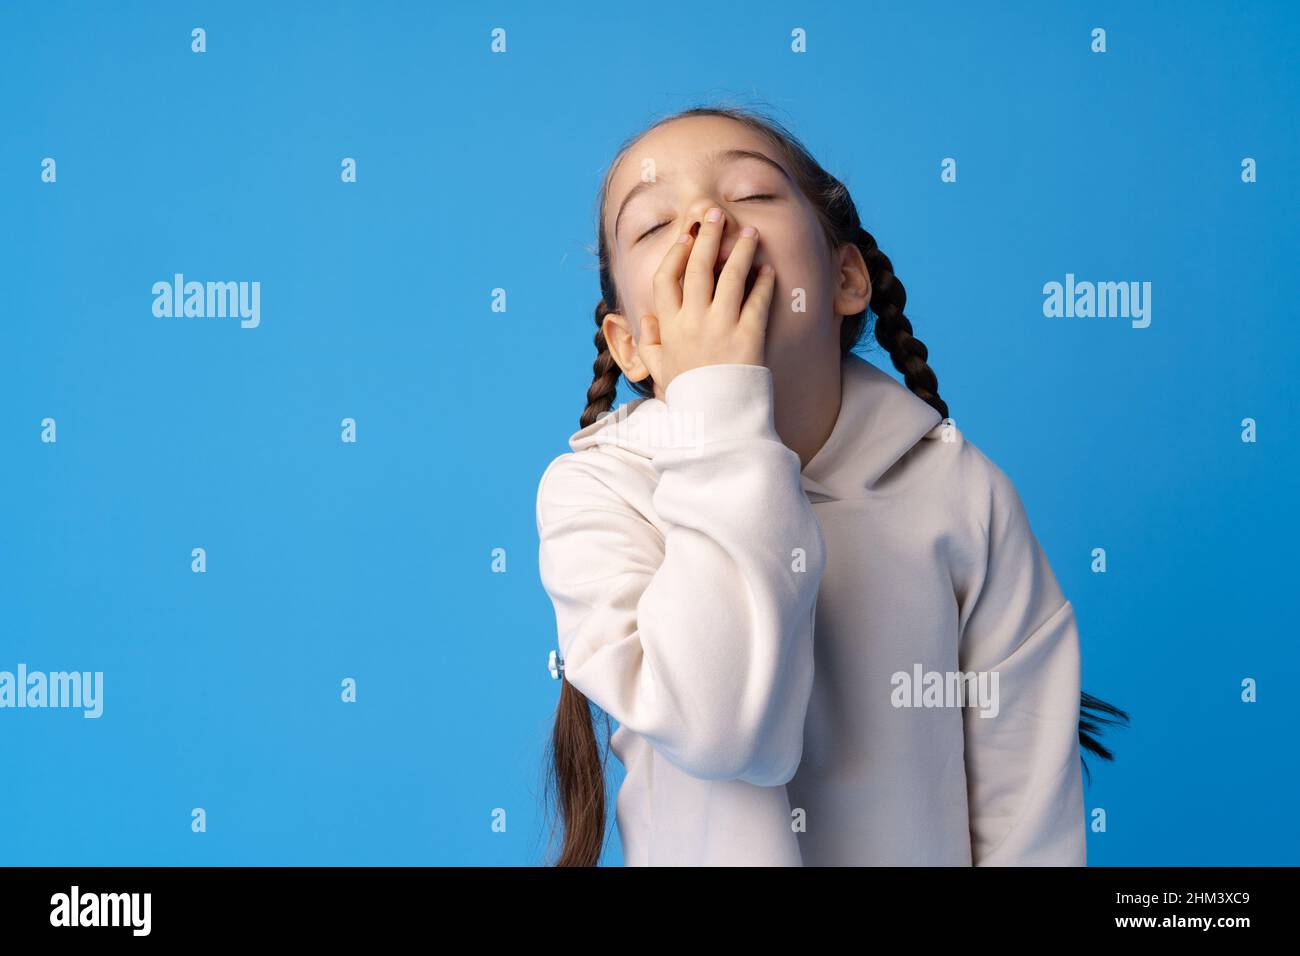 A tired little girl yawning on blue background. Stock Photo